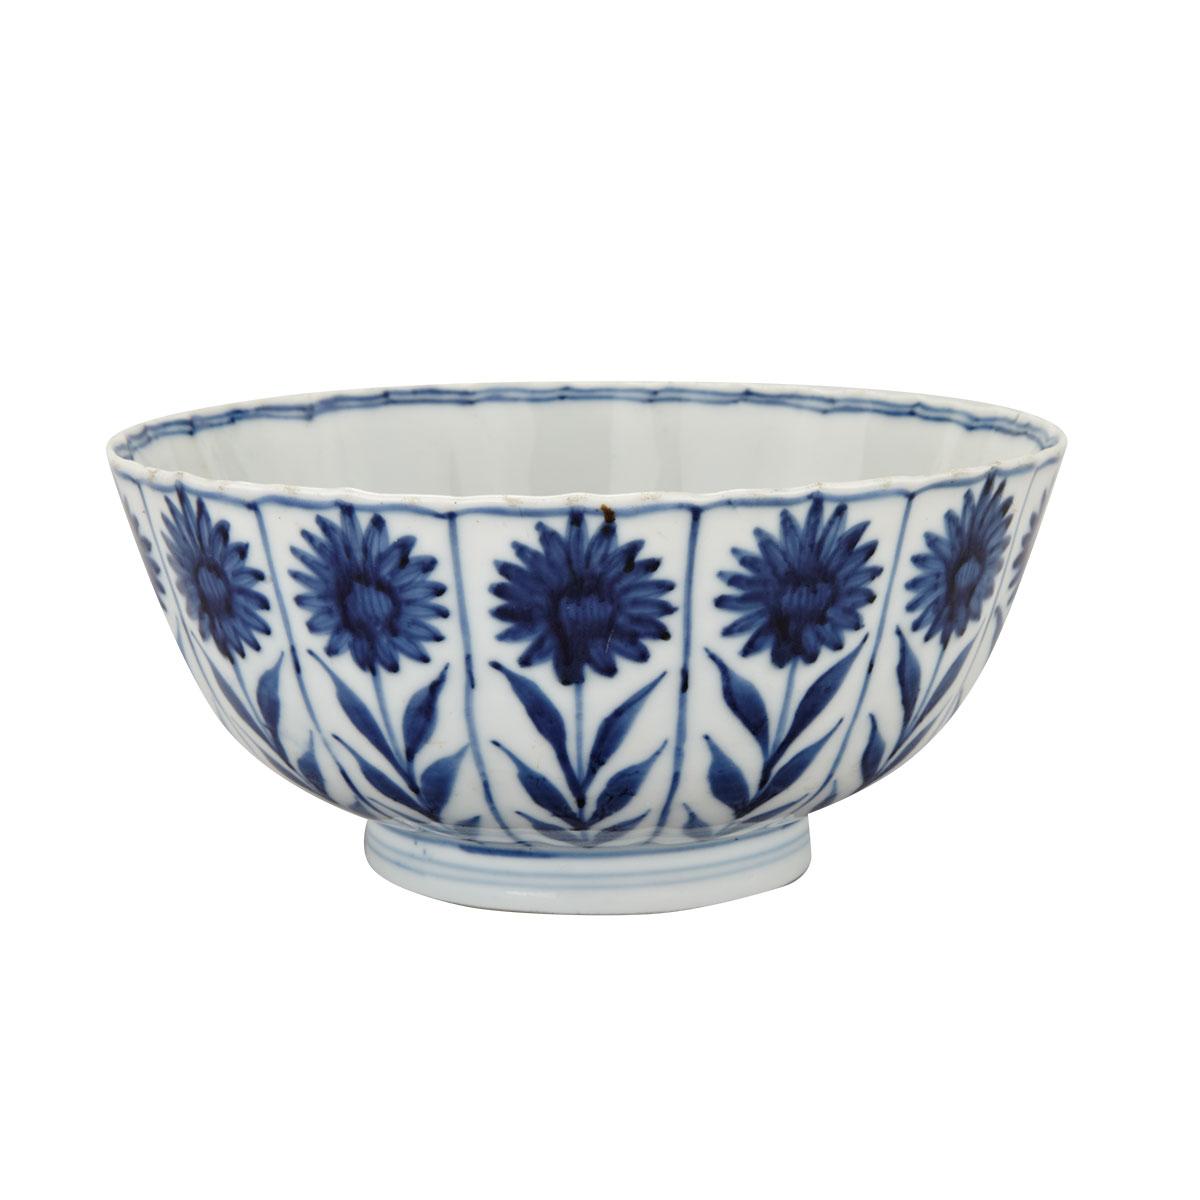 Export Blue and White Lobed Floral Bowl, Kangxi Period (1662-1722)